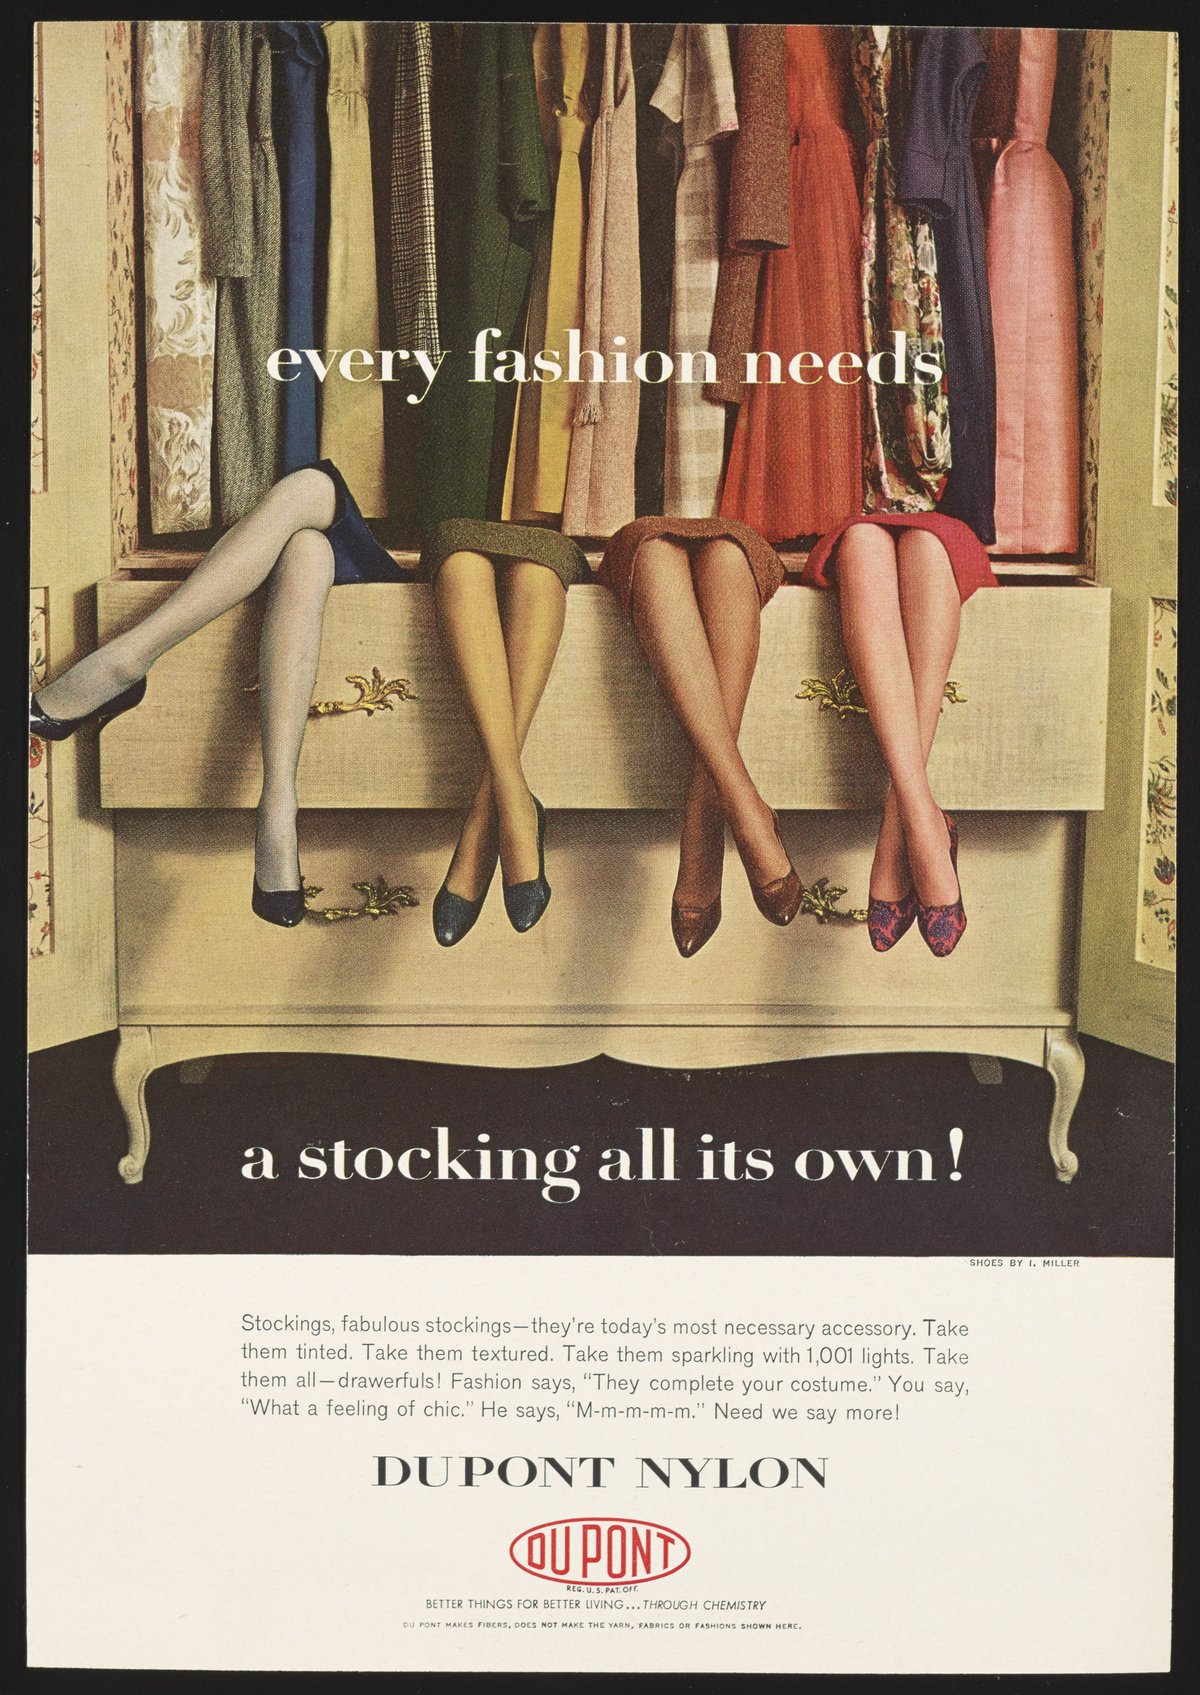 Every fashion needs a stocking all its own! - Science History Institute Digital Collections